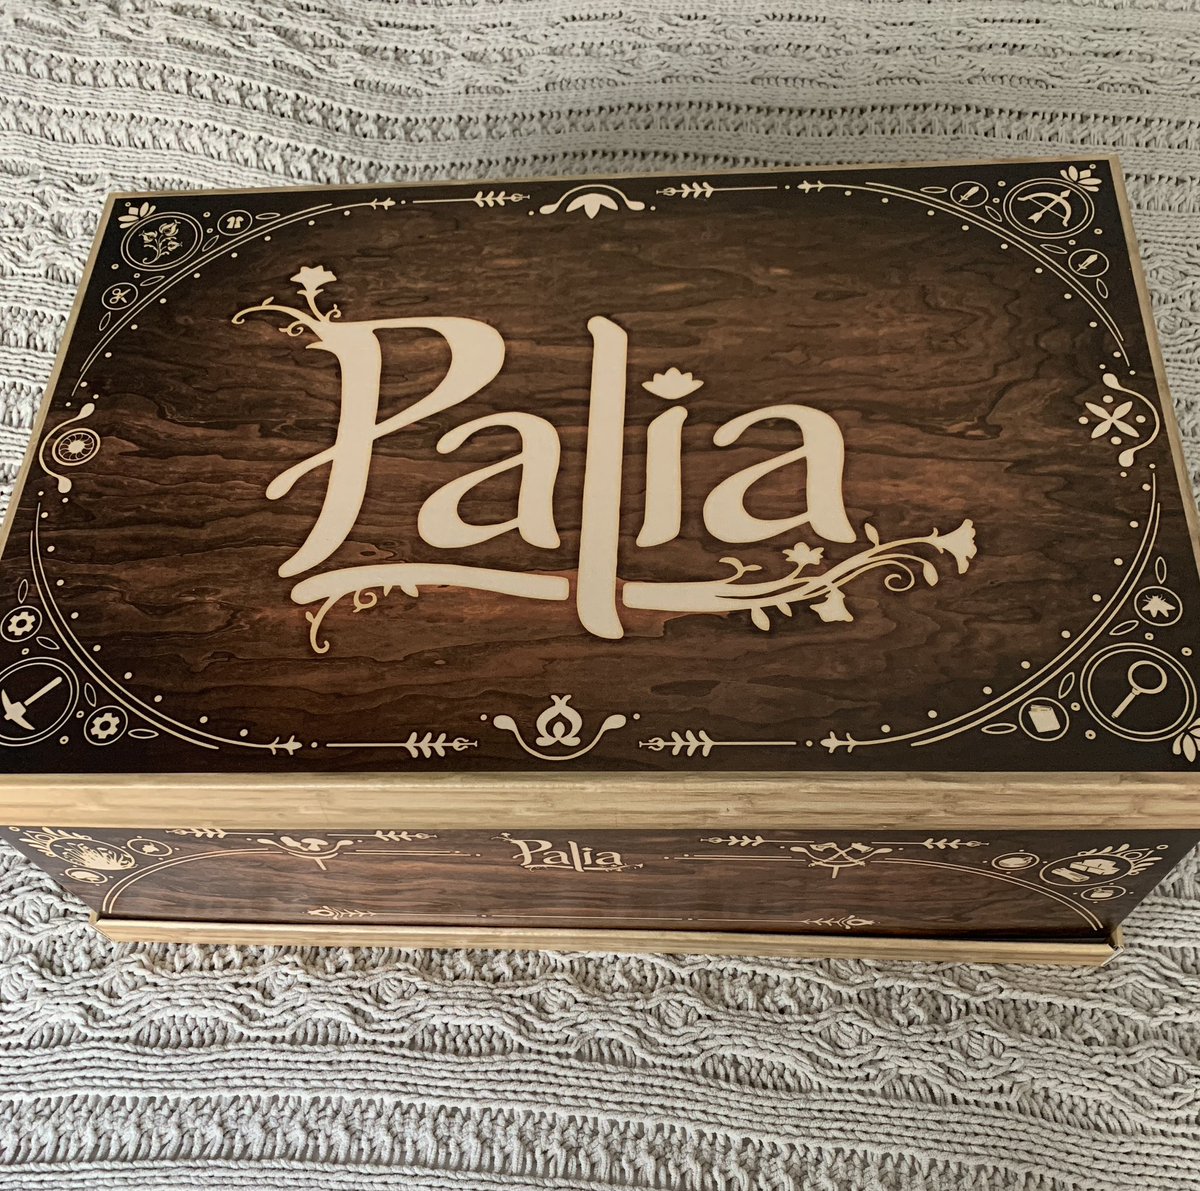 received mysterious yet beautiful box from @playPalia 👀 should i open it?